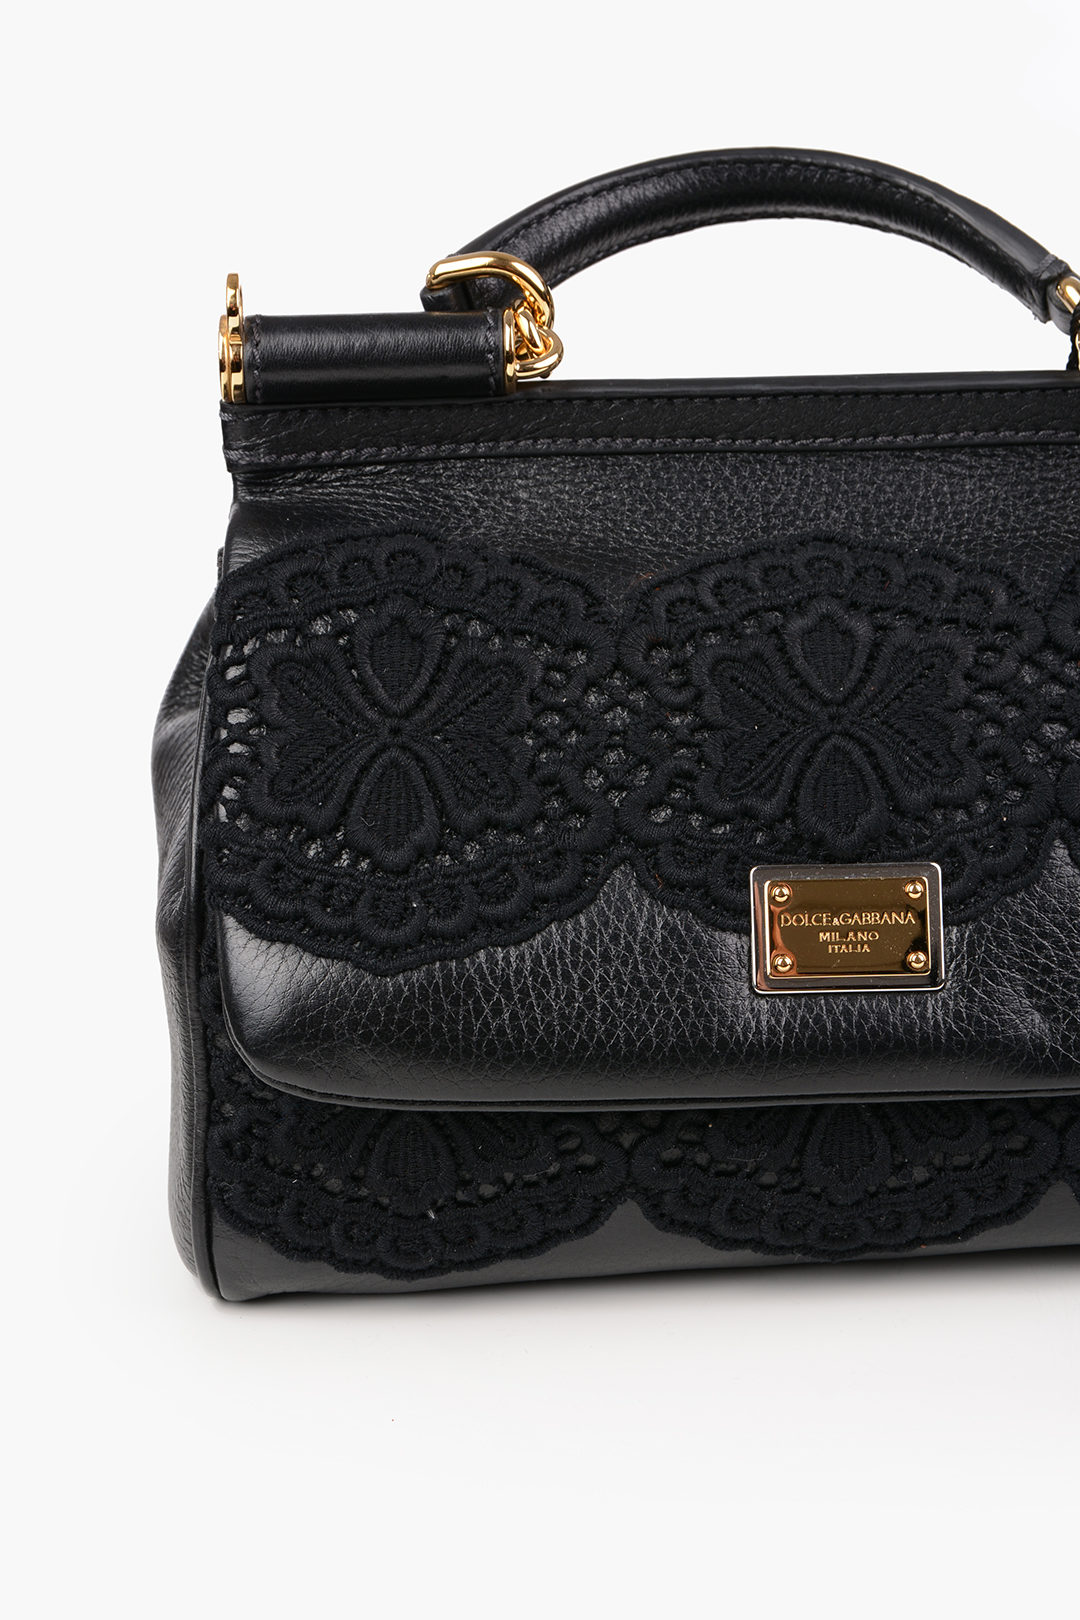 Dolce & Gabbana leather Bowler Bag with embroidered crochet women - Glamood  Outlet